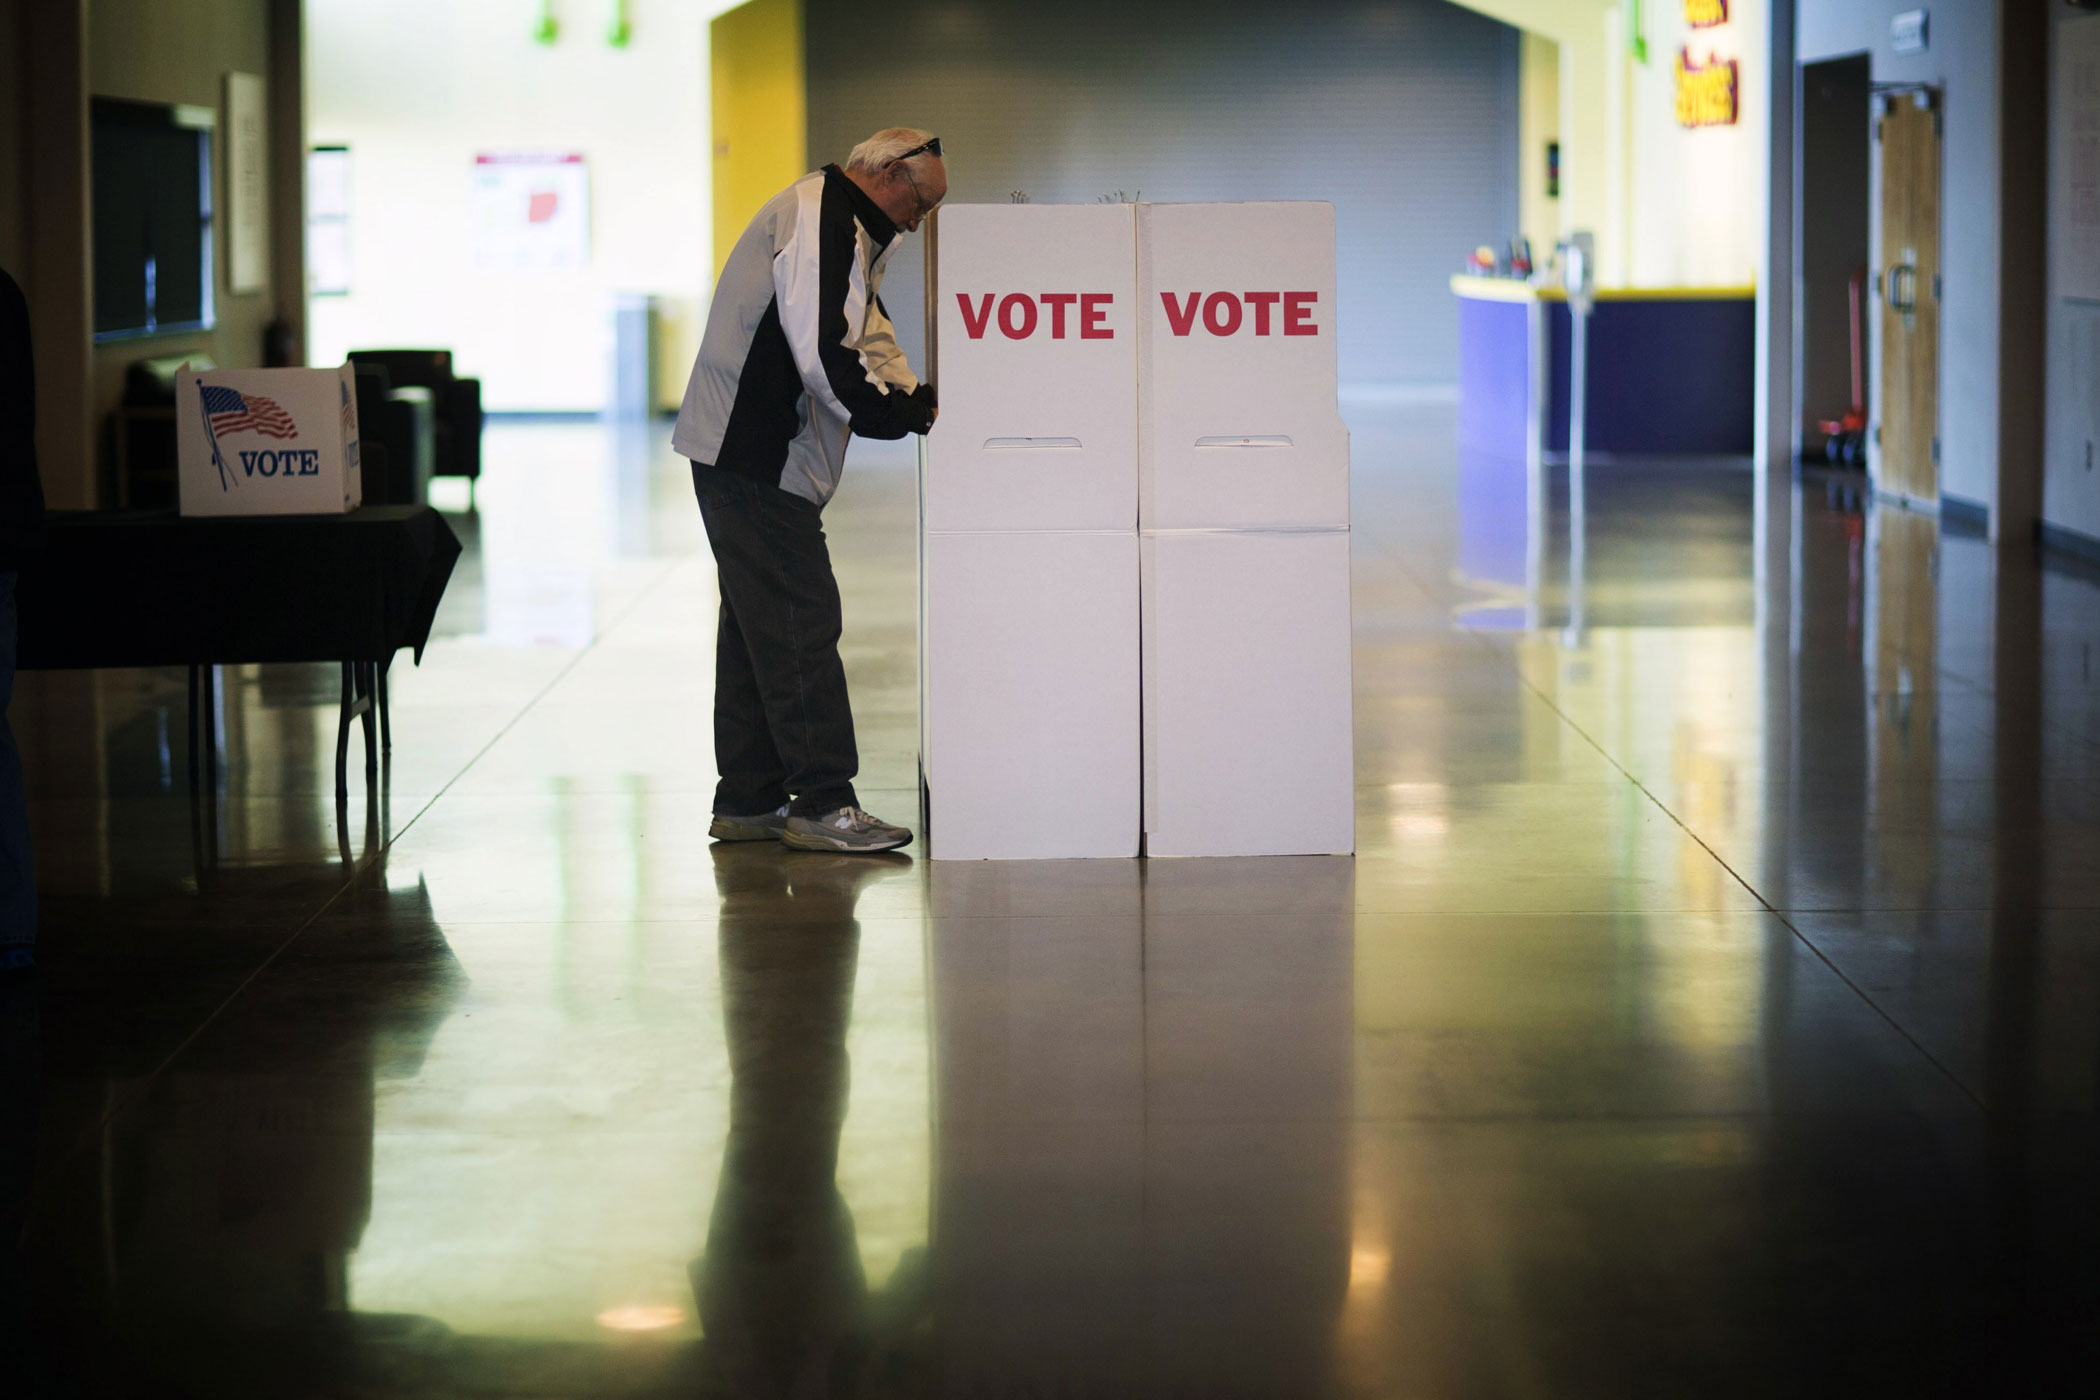 A man casts his ballot at a polling center in Edmond, Okla. on March 1.